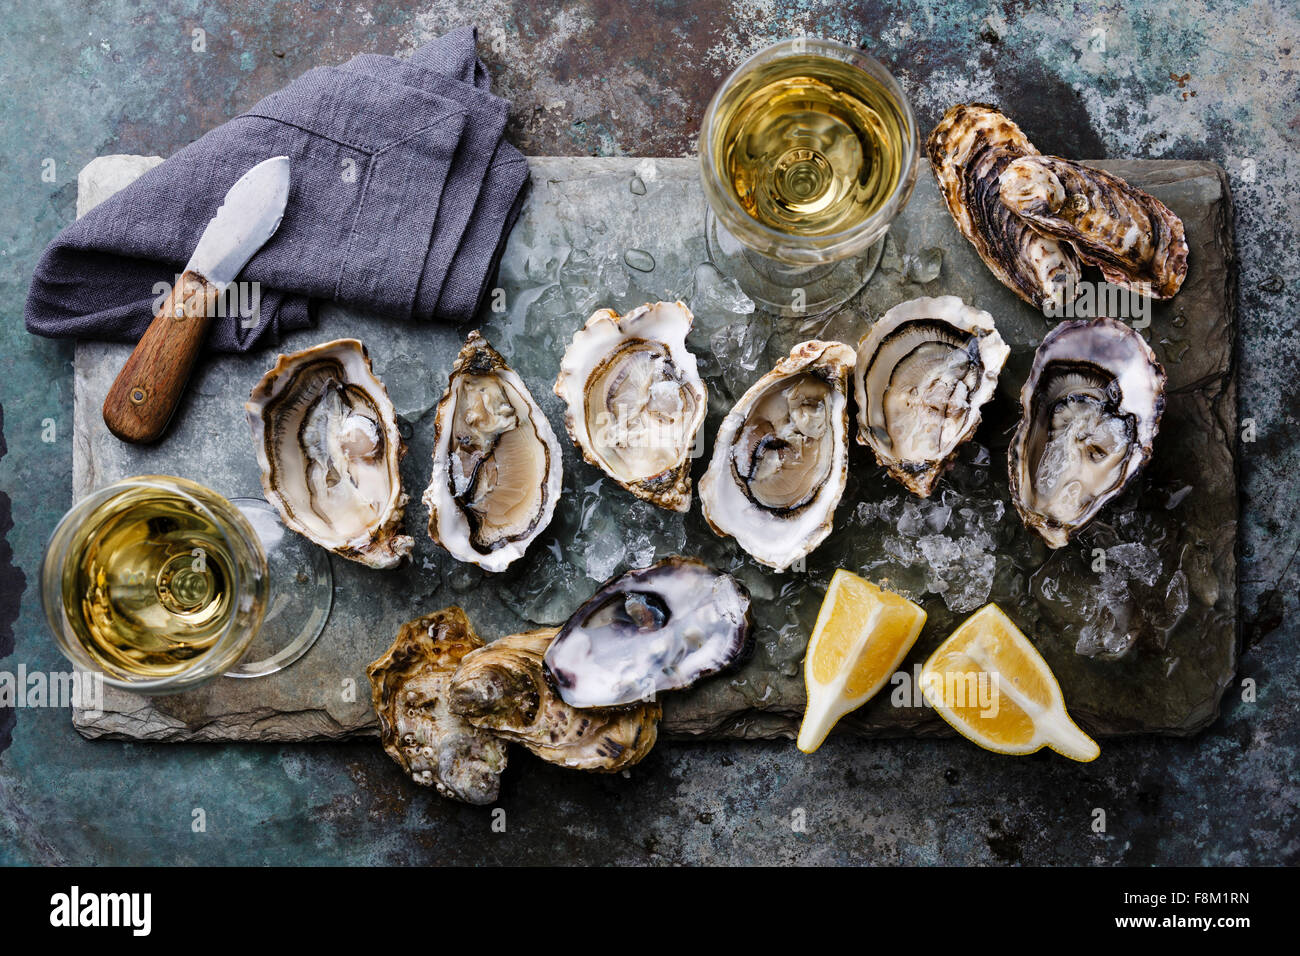 Open Oysters Fines de Claire on stone plate with lemon Stock Photo